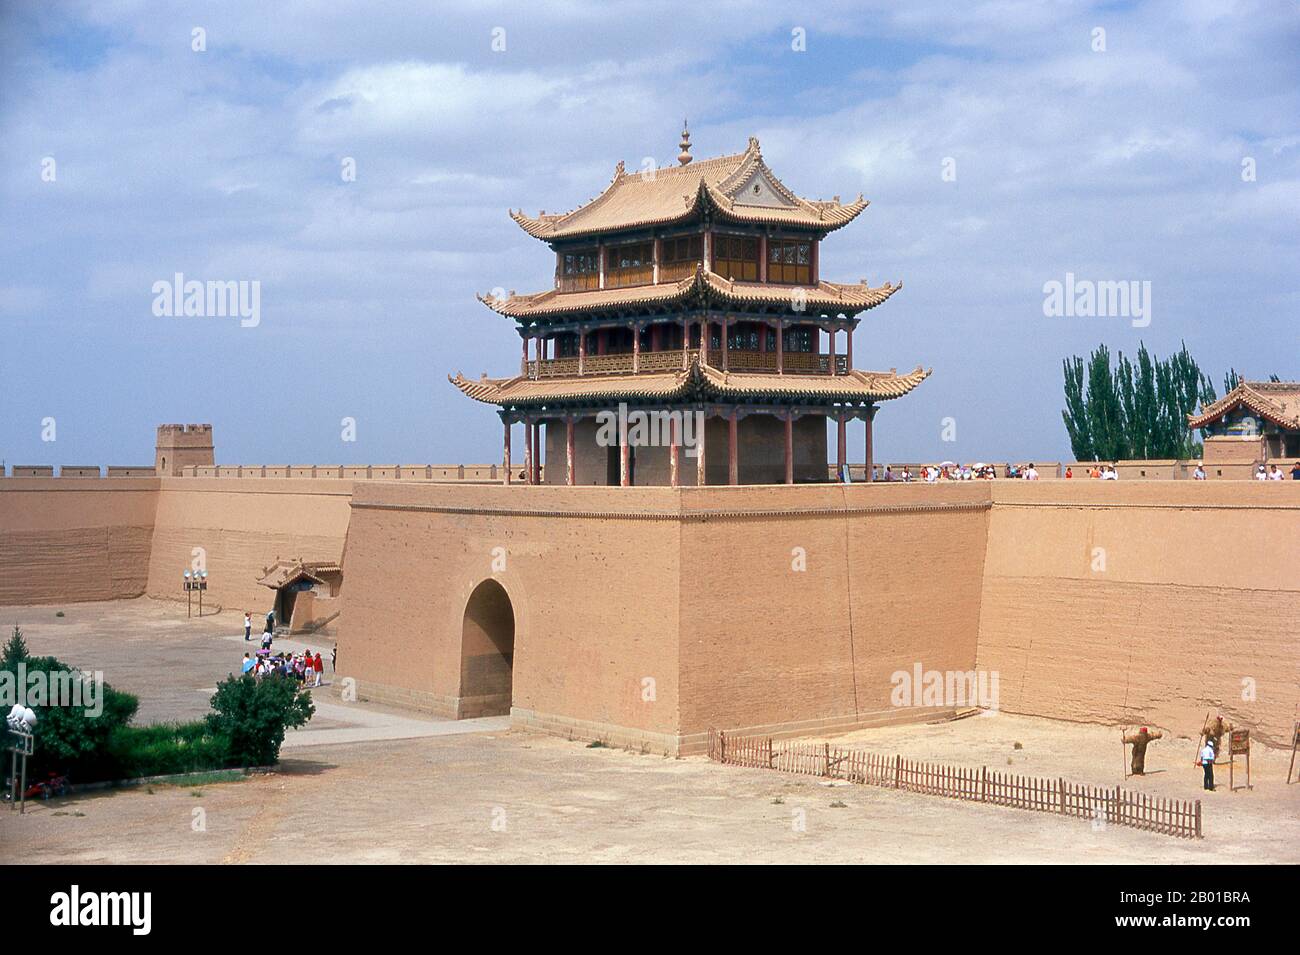 China: Jiayuguan Men (Gate of Sighs), Jiayuguan Fort, Jiayuguan, Gansu.  Jiayuguan, the ‘First and Greatest Pass under Heaven’, was completed in 1372 on the orders of Zhu Yuanzhang, the first Ming Emperor (1368-98), to mark the end of the Ming Great Wall. It was also the very limits of Chinese civilisation, and the beginnings of the outer ‘barbarian’ lands.  For centuries the fort was not just of strategic importance to Han Chinese, but of cultural significance as well. This was the last civilised place before the outer darkness, and those proceeding beyond faced a life of exile. Stock Photo